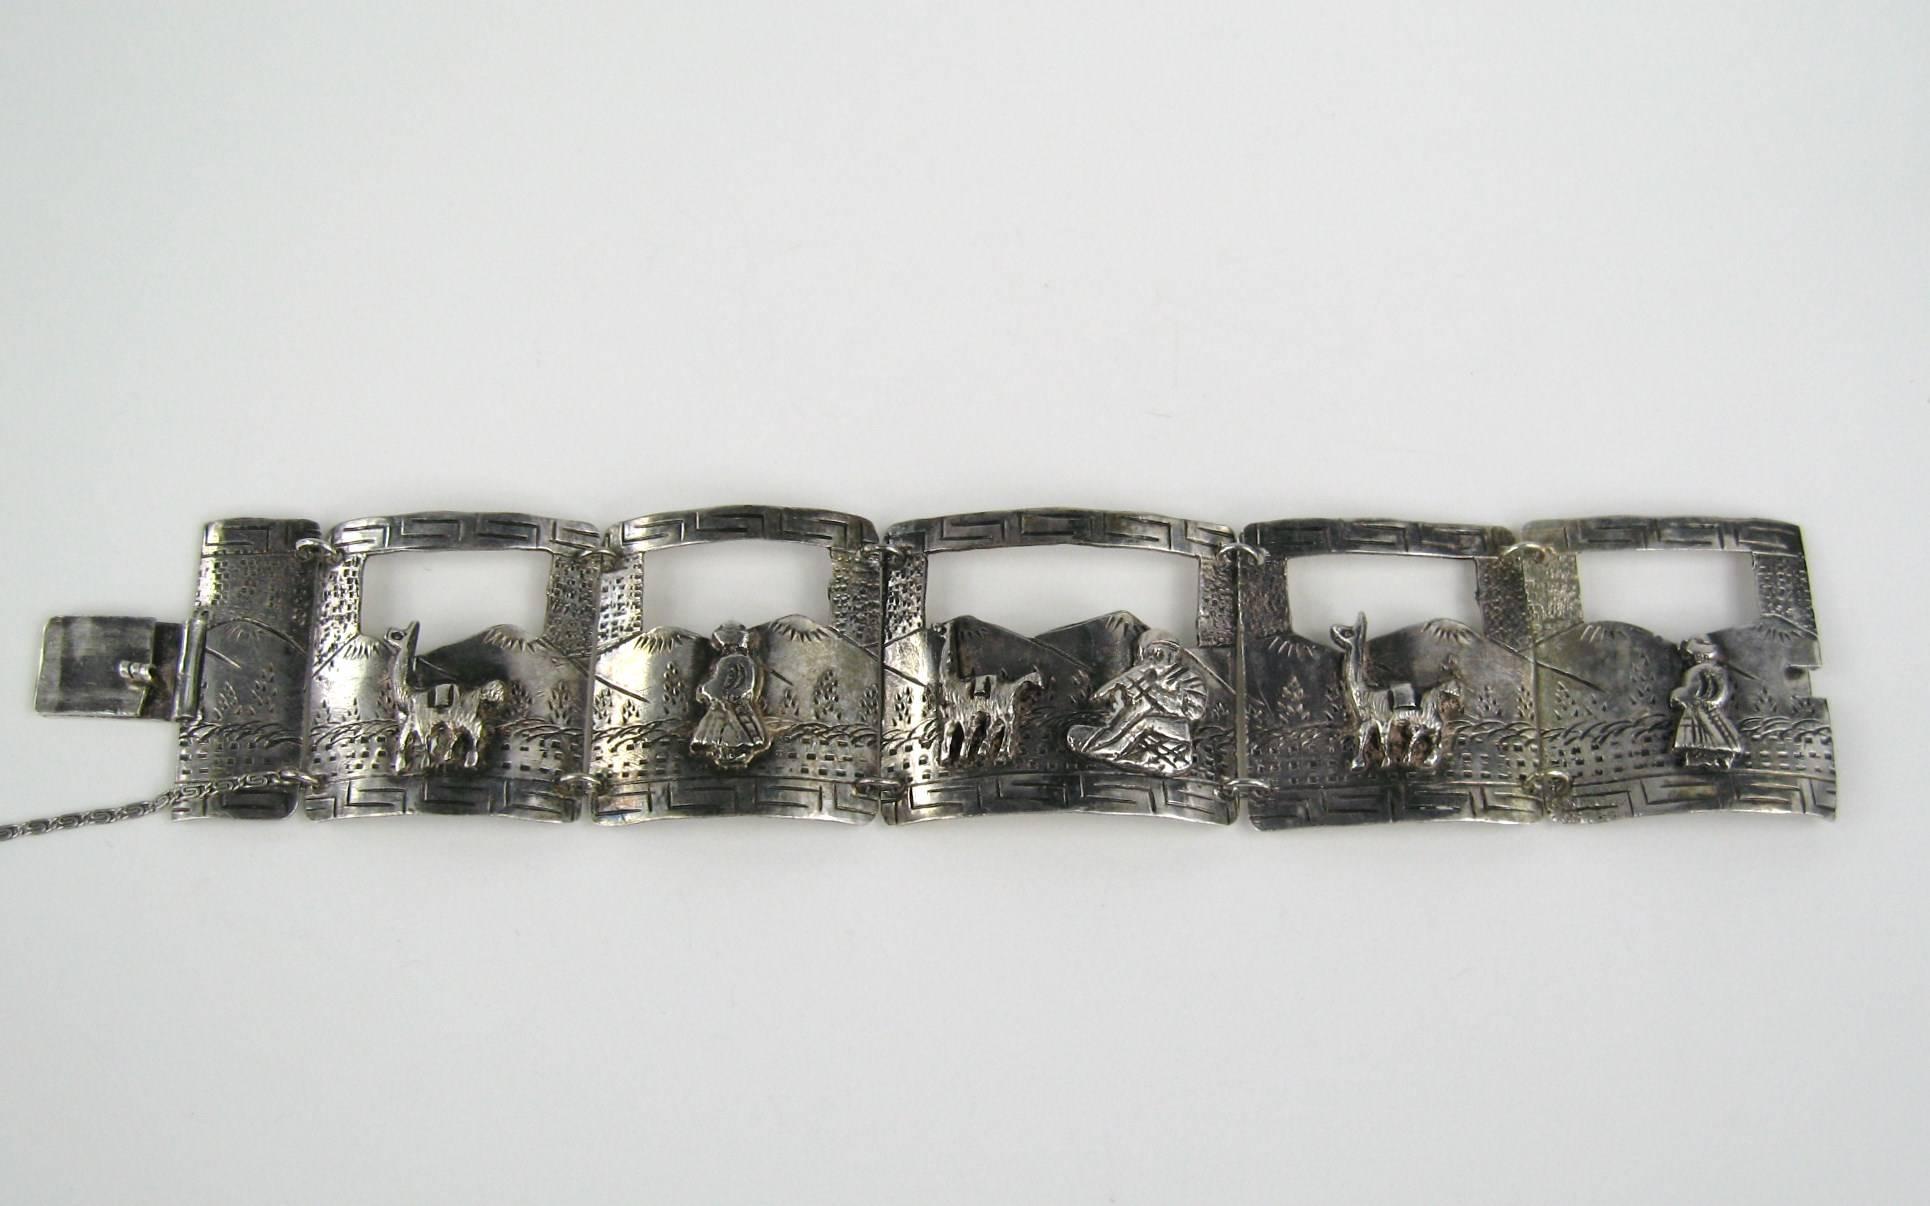 A stunning Peruvian paneled Sterling Bracelet, Safety chain attached. Slide-in clasp, nice and tight. Paneled with Camels and People Hallmarked on the back. Measures 7.25 inches long Panels are 1.34 inches x 1.22 inches. This is out of a massive